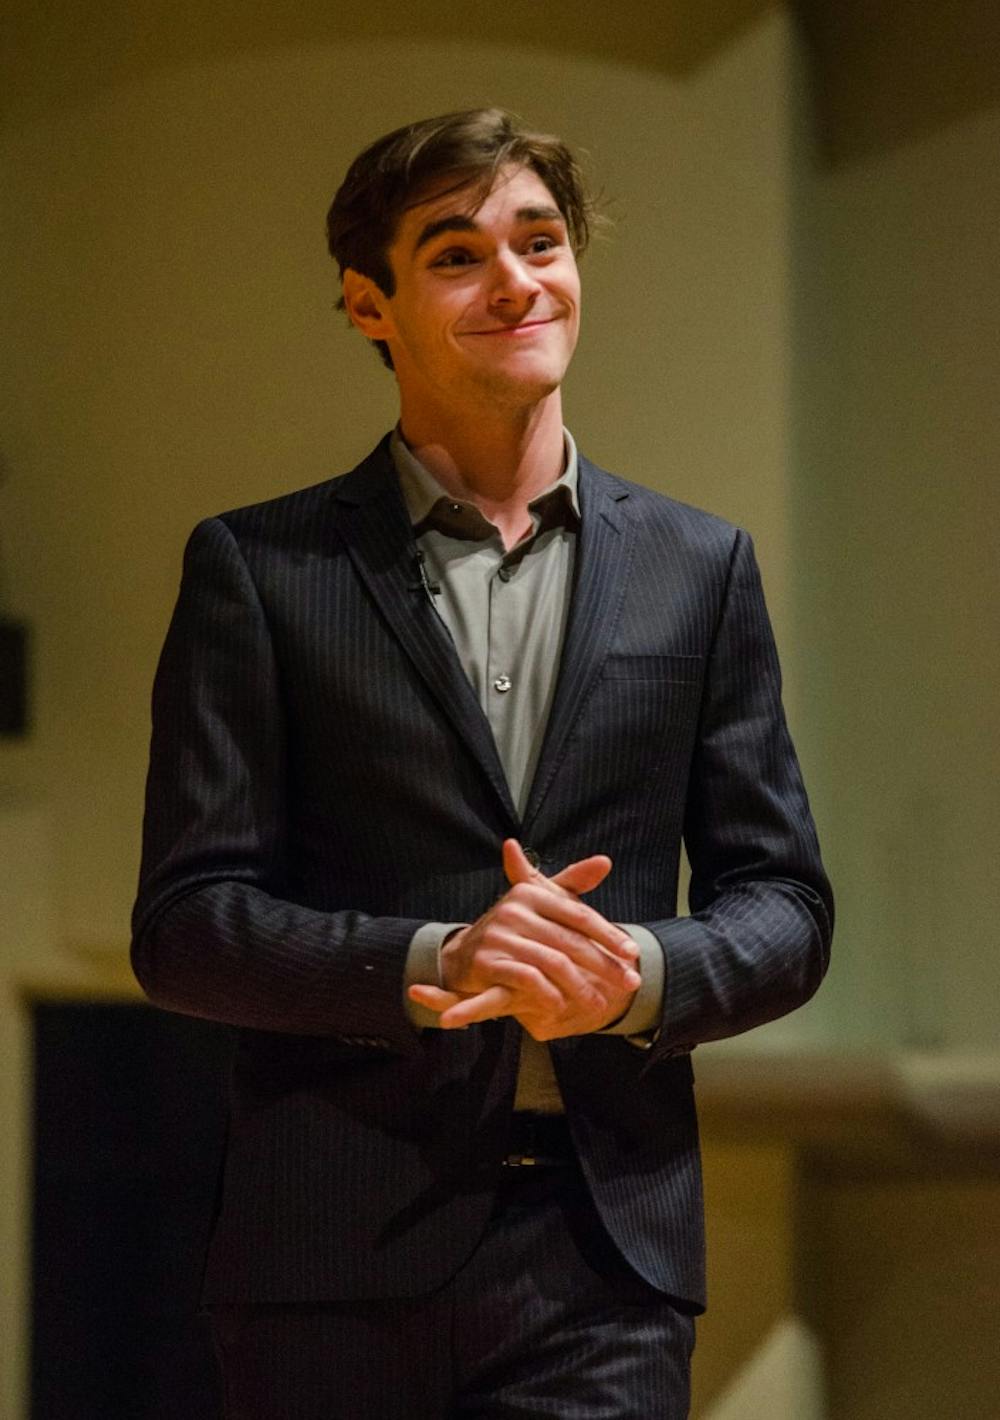 <p>RJ Mitte, known for his role as Walter White Jr. in AMC's "Breaking Bad," spoke at Ball State on March 21 about "Overcoming Adversity: Turning a Disadvantage into an Advantage" at Pruis Hall as part of the Excellence in Leadership lecture series. Mitte was bullied as a child because of his cerebral palsy. <em>DN PHOTO KELLEN HAZELIP</em></p>